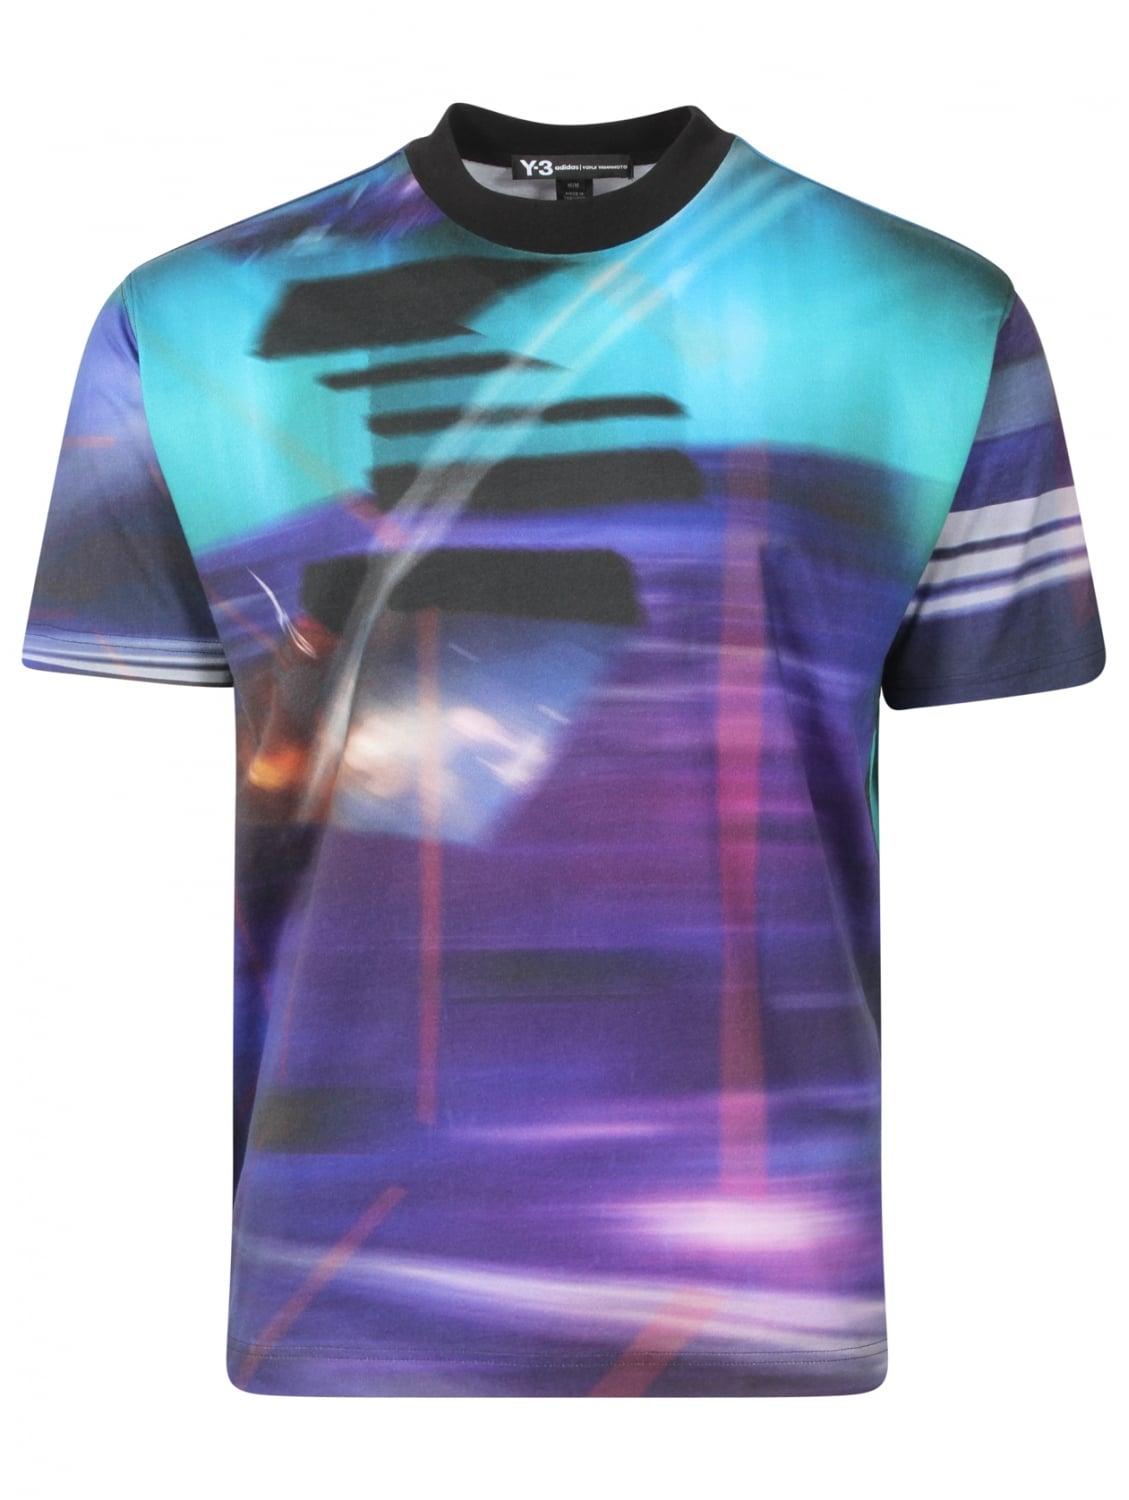 Lyst - Y-3 Abstract Graphic Print T-shirt Purple in Purple for Men